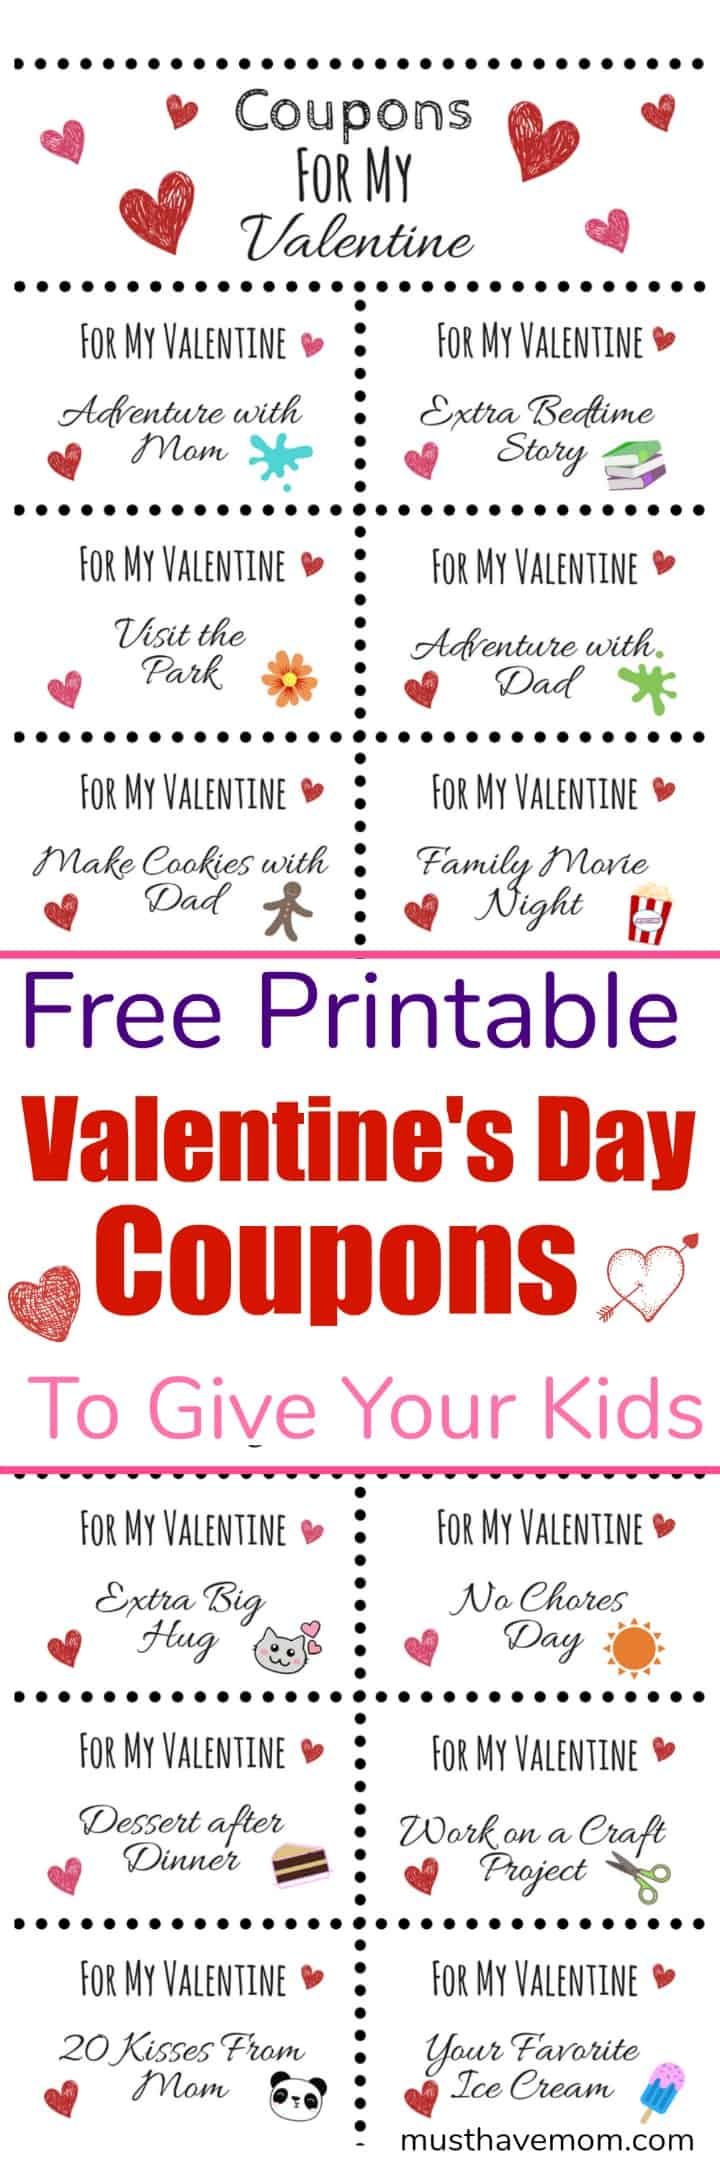 Free printable Valentine's Day coupons to give your kids! Show your love with these fun kids coupons!